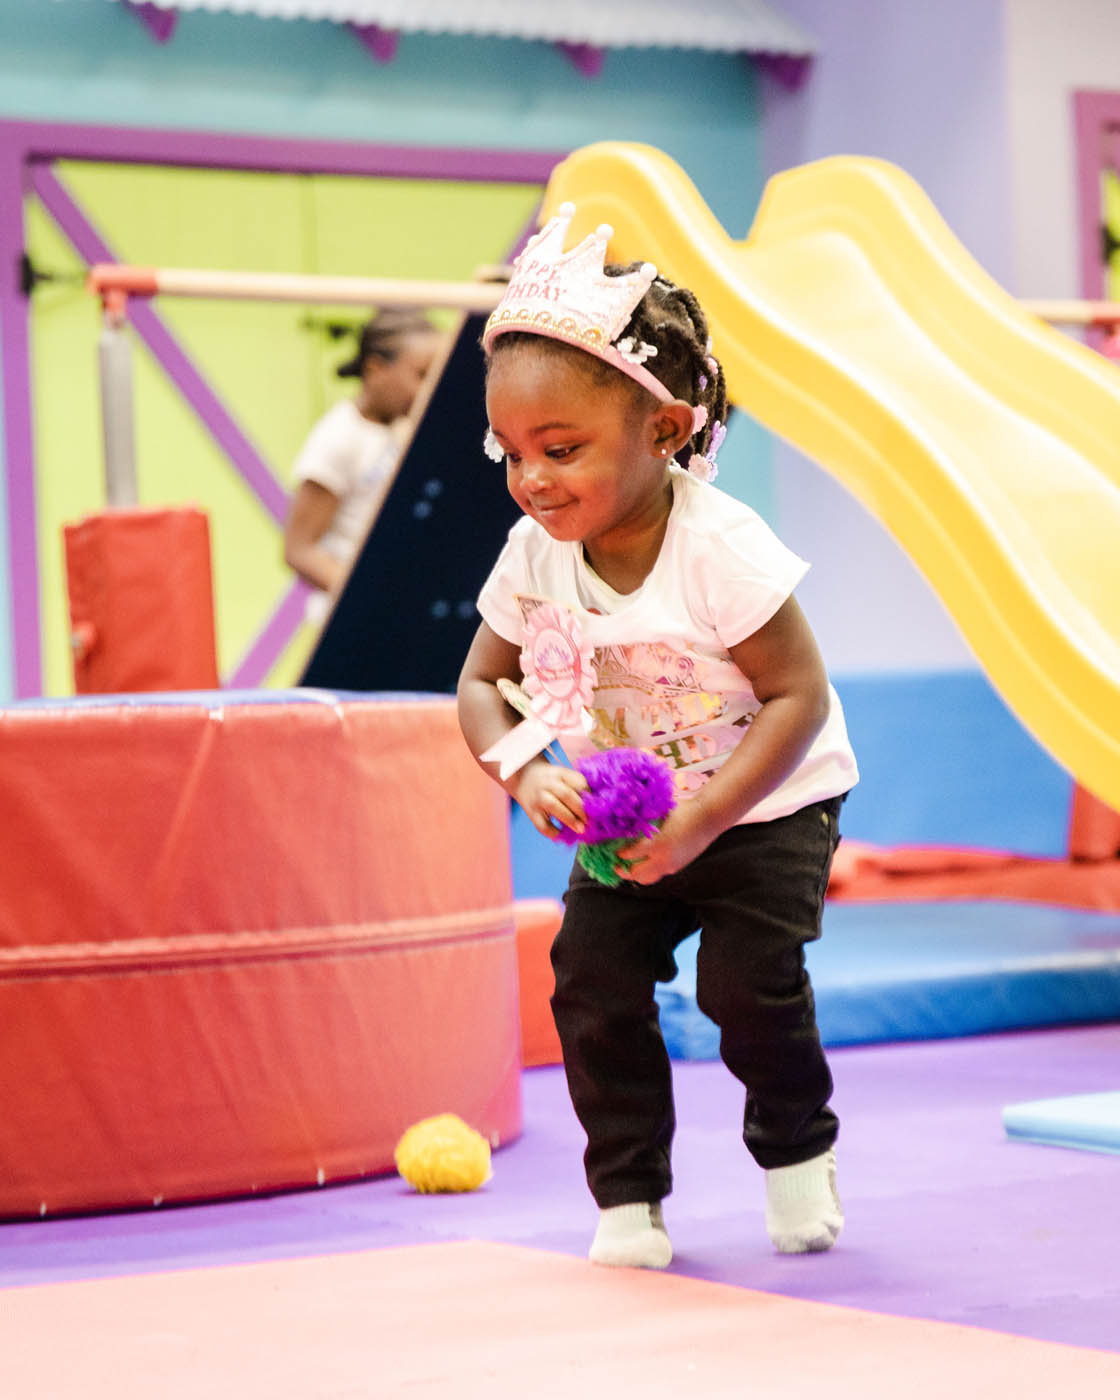 A little girl enjoying her b day party at Romp n' Roll Midlothian kids birthday party places.